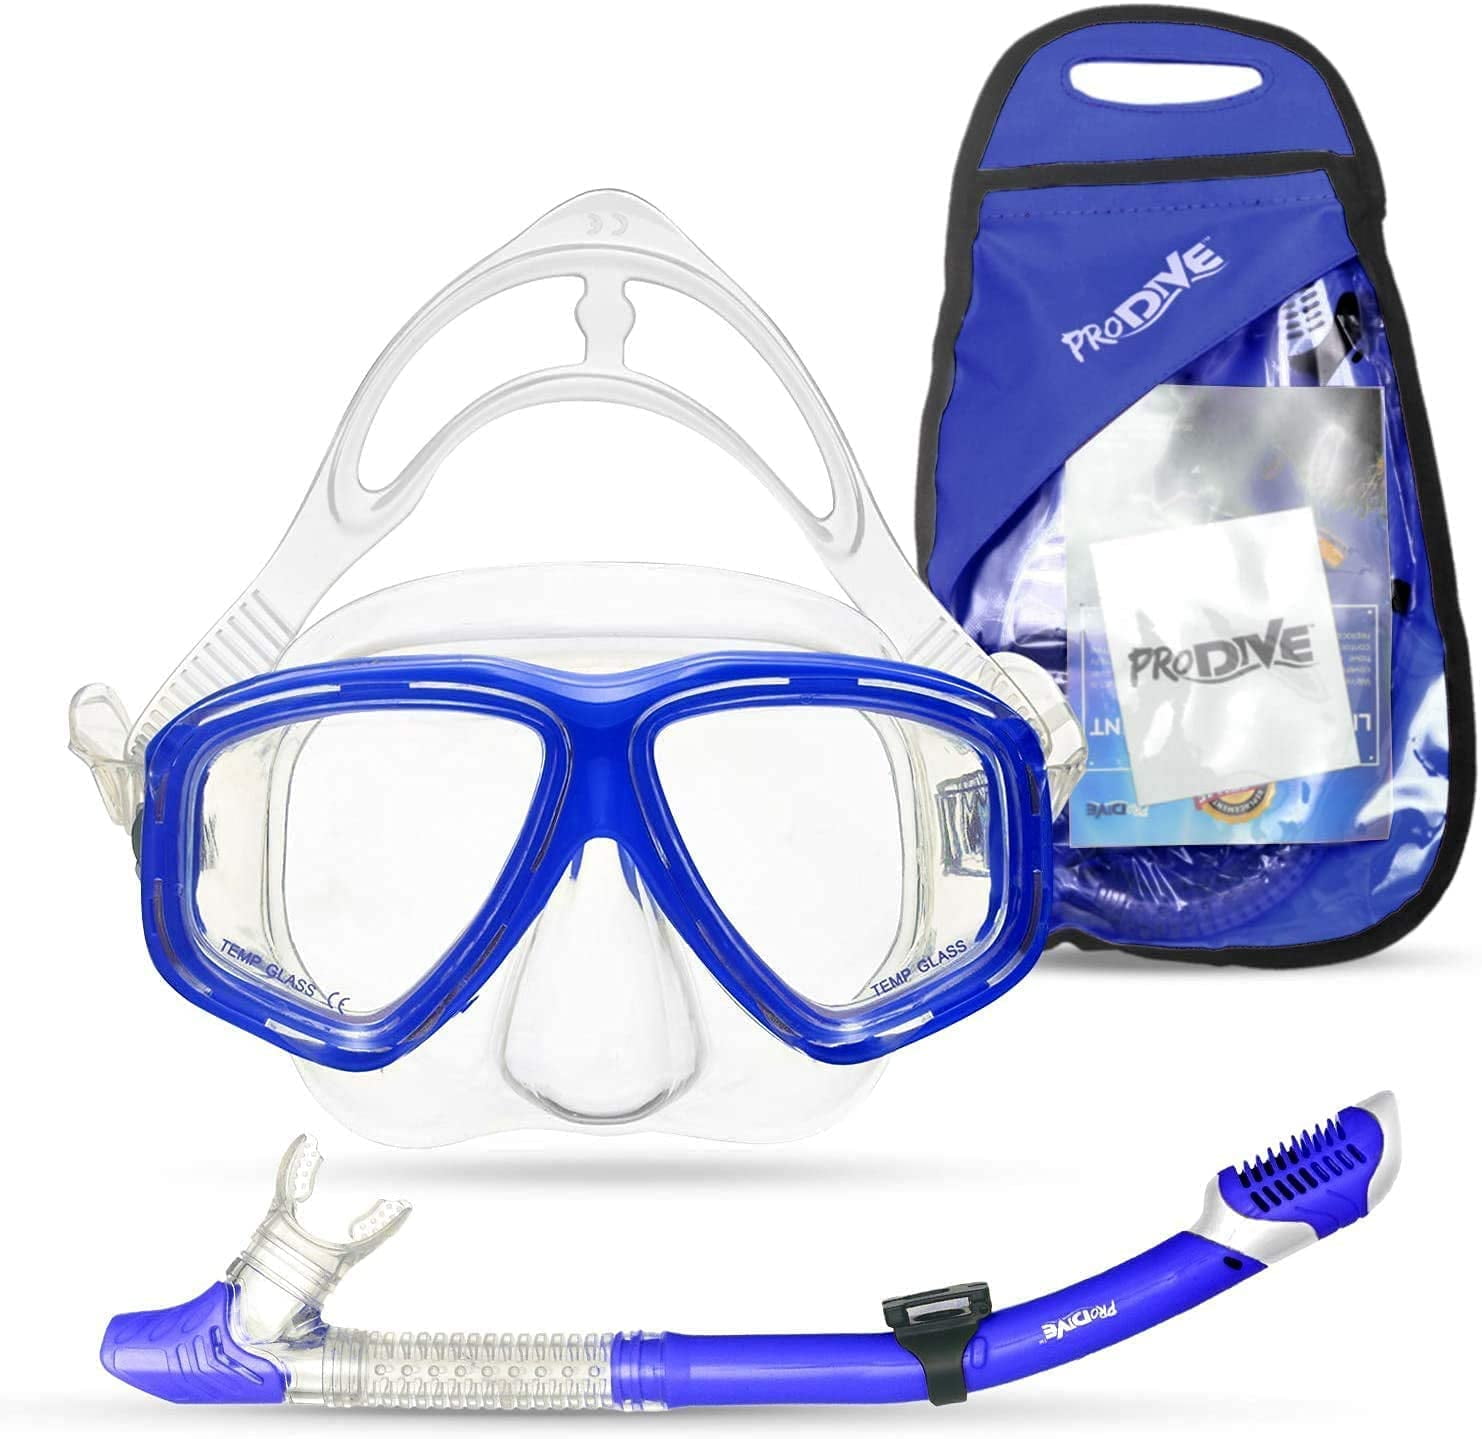 ProDive Dry Top Snorkel Set with Tempered Glass Diving Mask, Watertight and Anti-Fog Lens and Waterproof Gear Bag, Diving Gear or Snorkeling Gear with Snorkel Mask